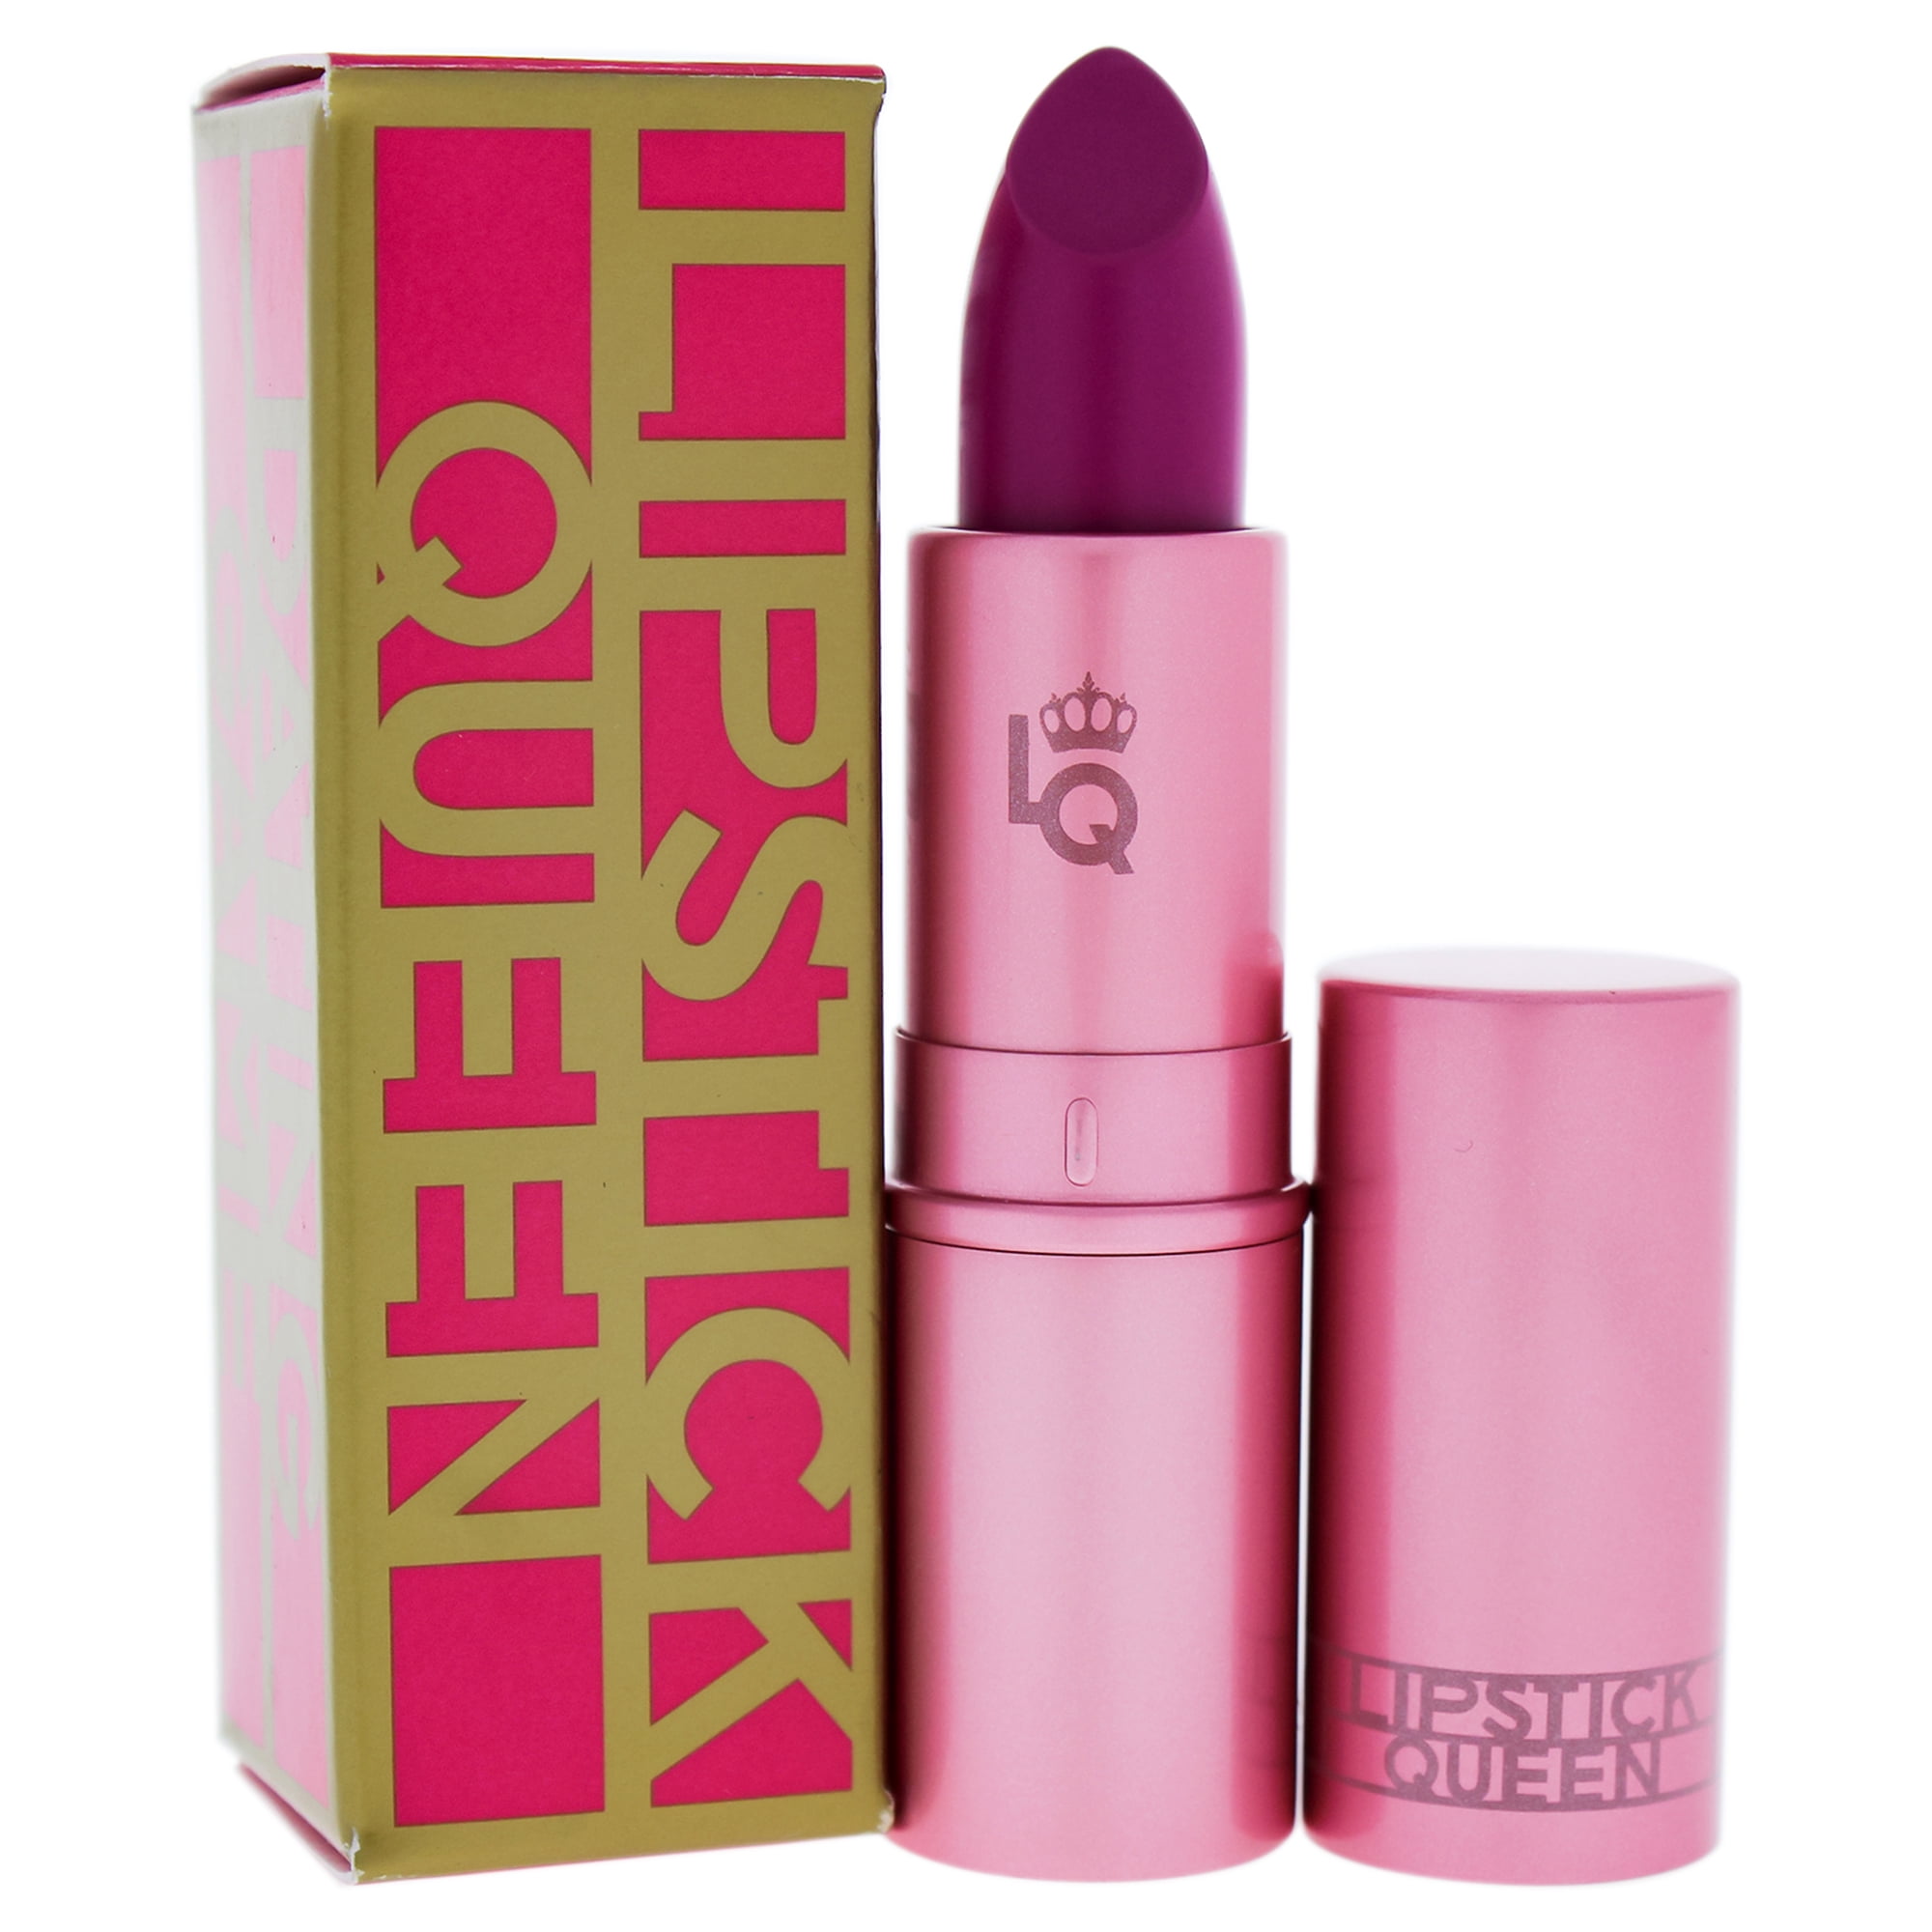 Dating Game Lipstick - Mr. Right Now by Lipstick Queen for Women - 0.12 ...